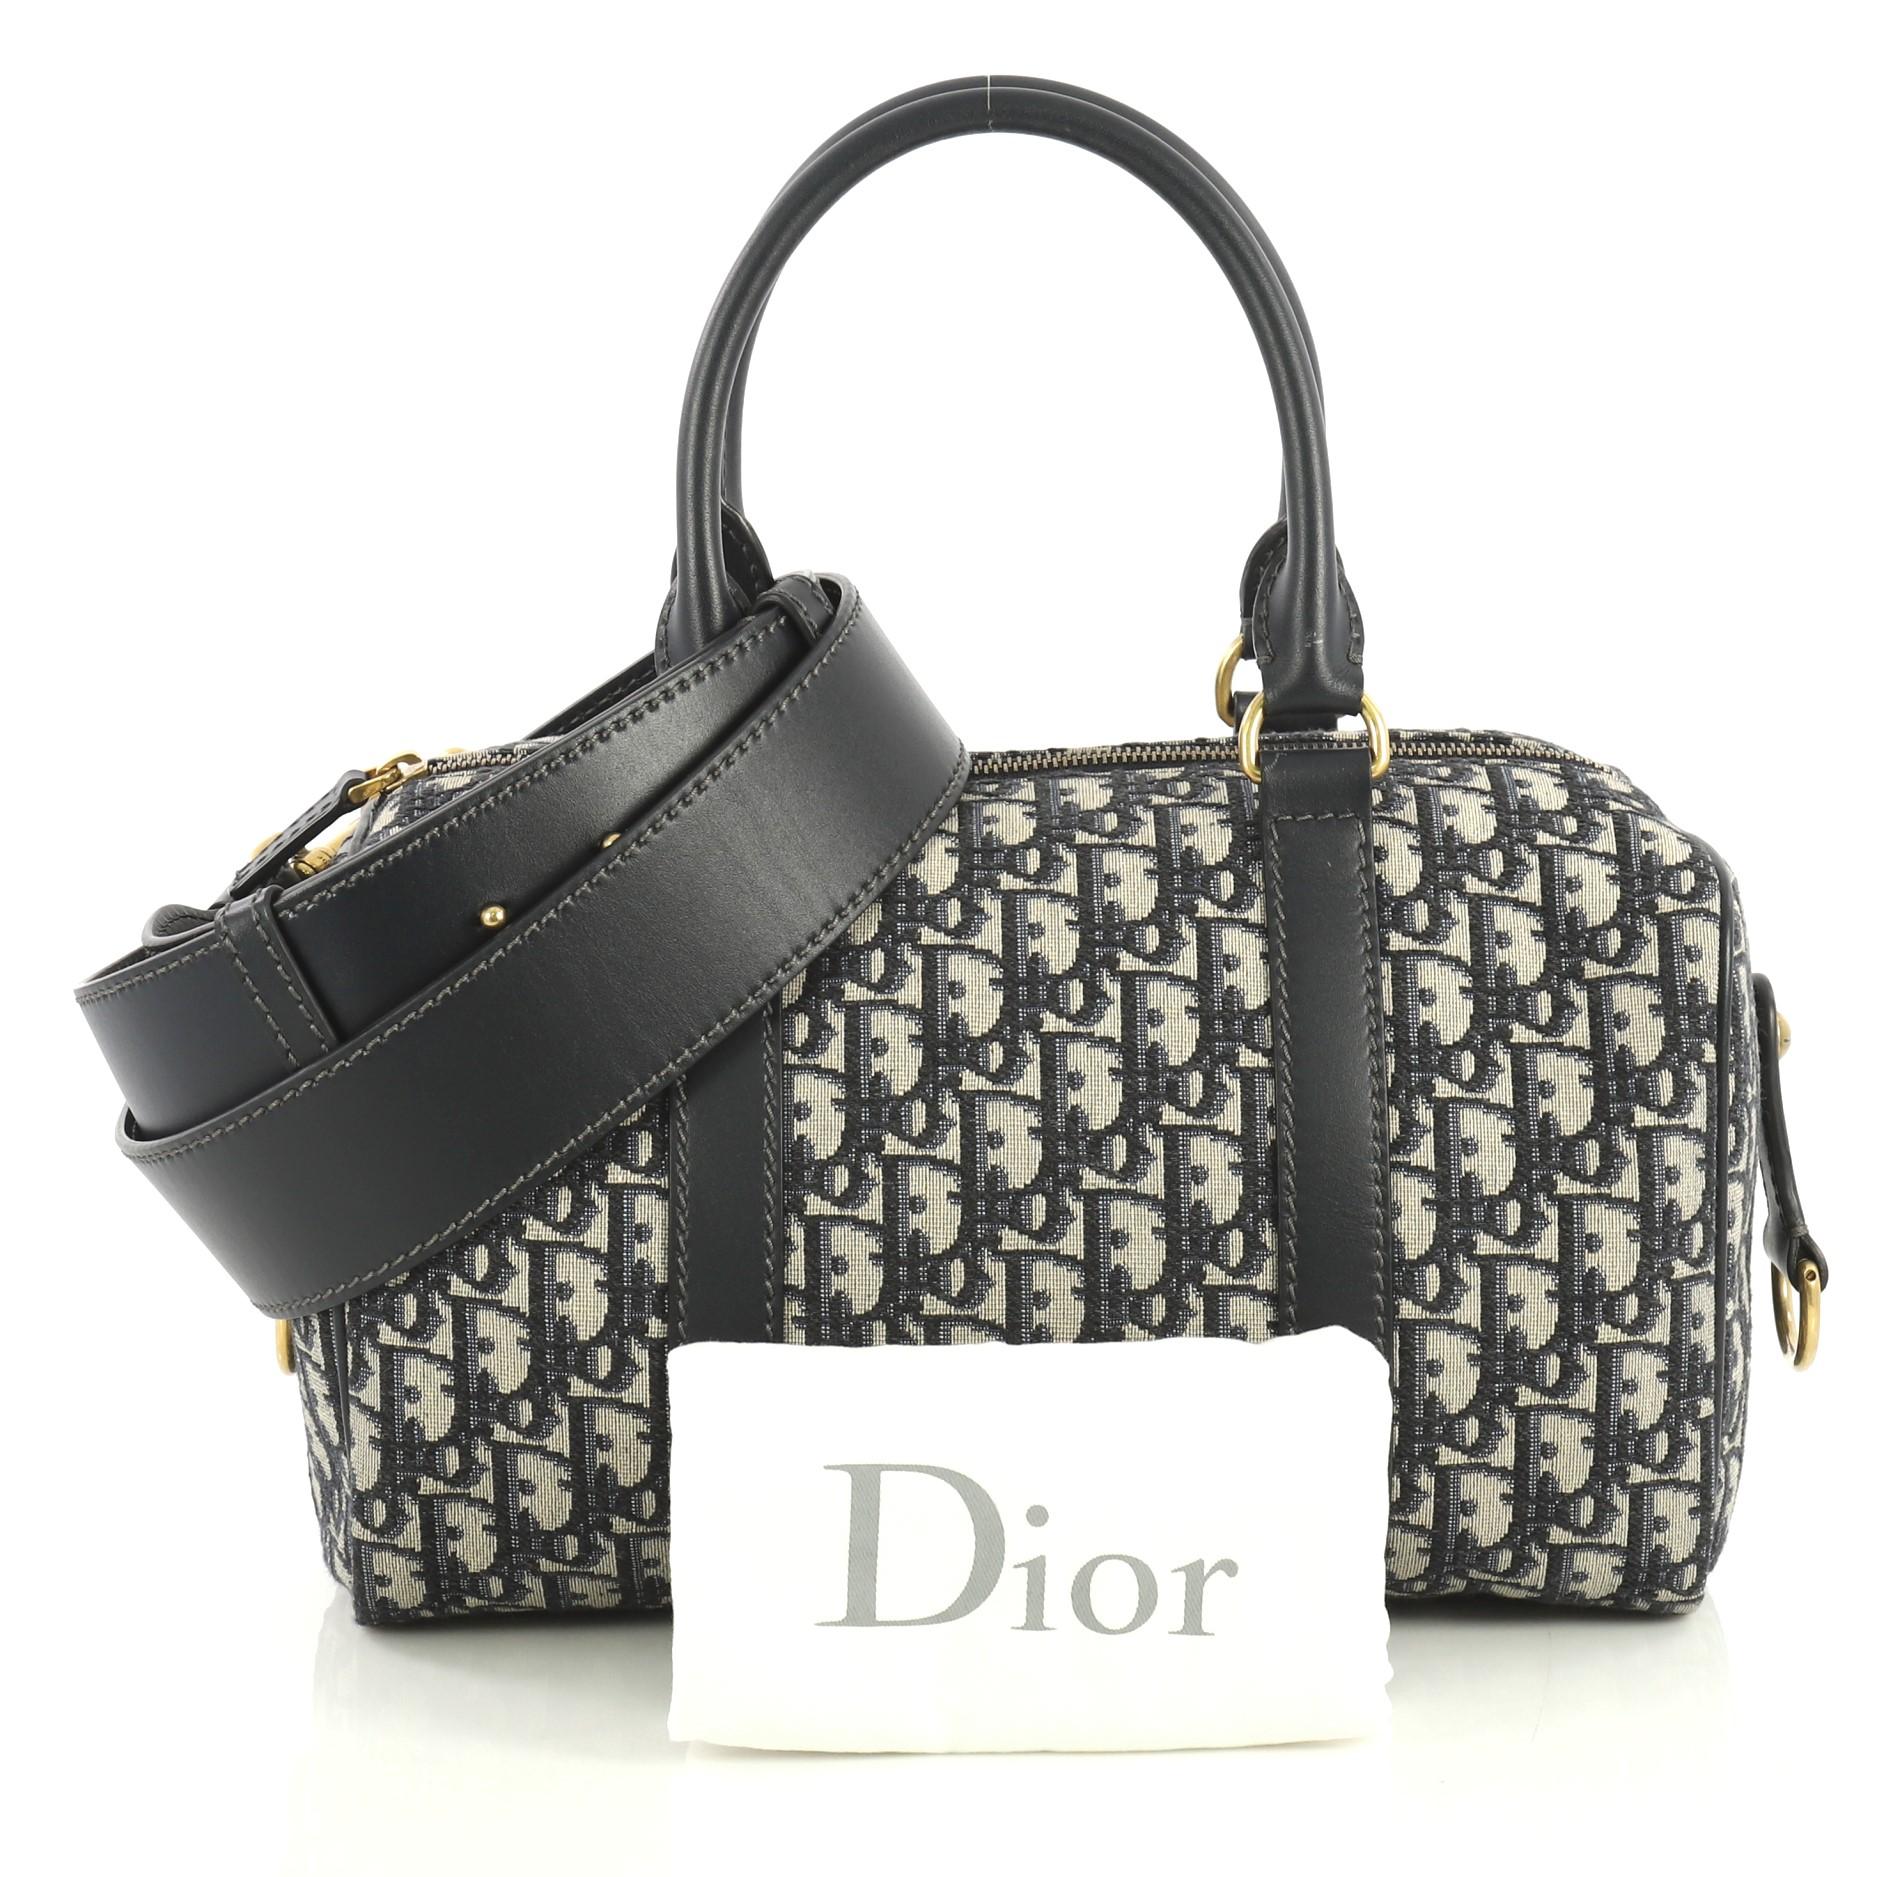 This Christian Dior Convertible Boston Bag Oblique Canvas Medium, crafted from blue and neutral canvas, features dual rolled handles, leather trim, and aged gold-tone hardware. Its zip closure opens to a neutral fabric interior with zip pocket.